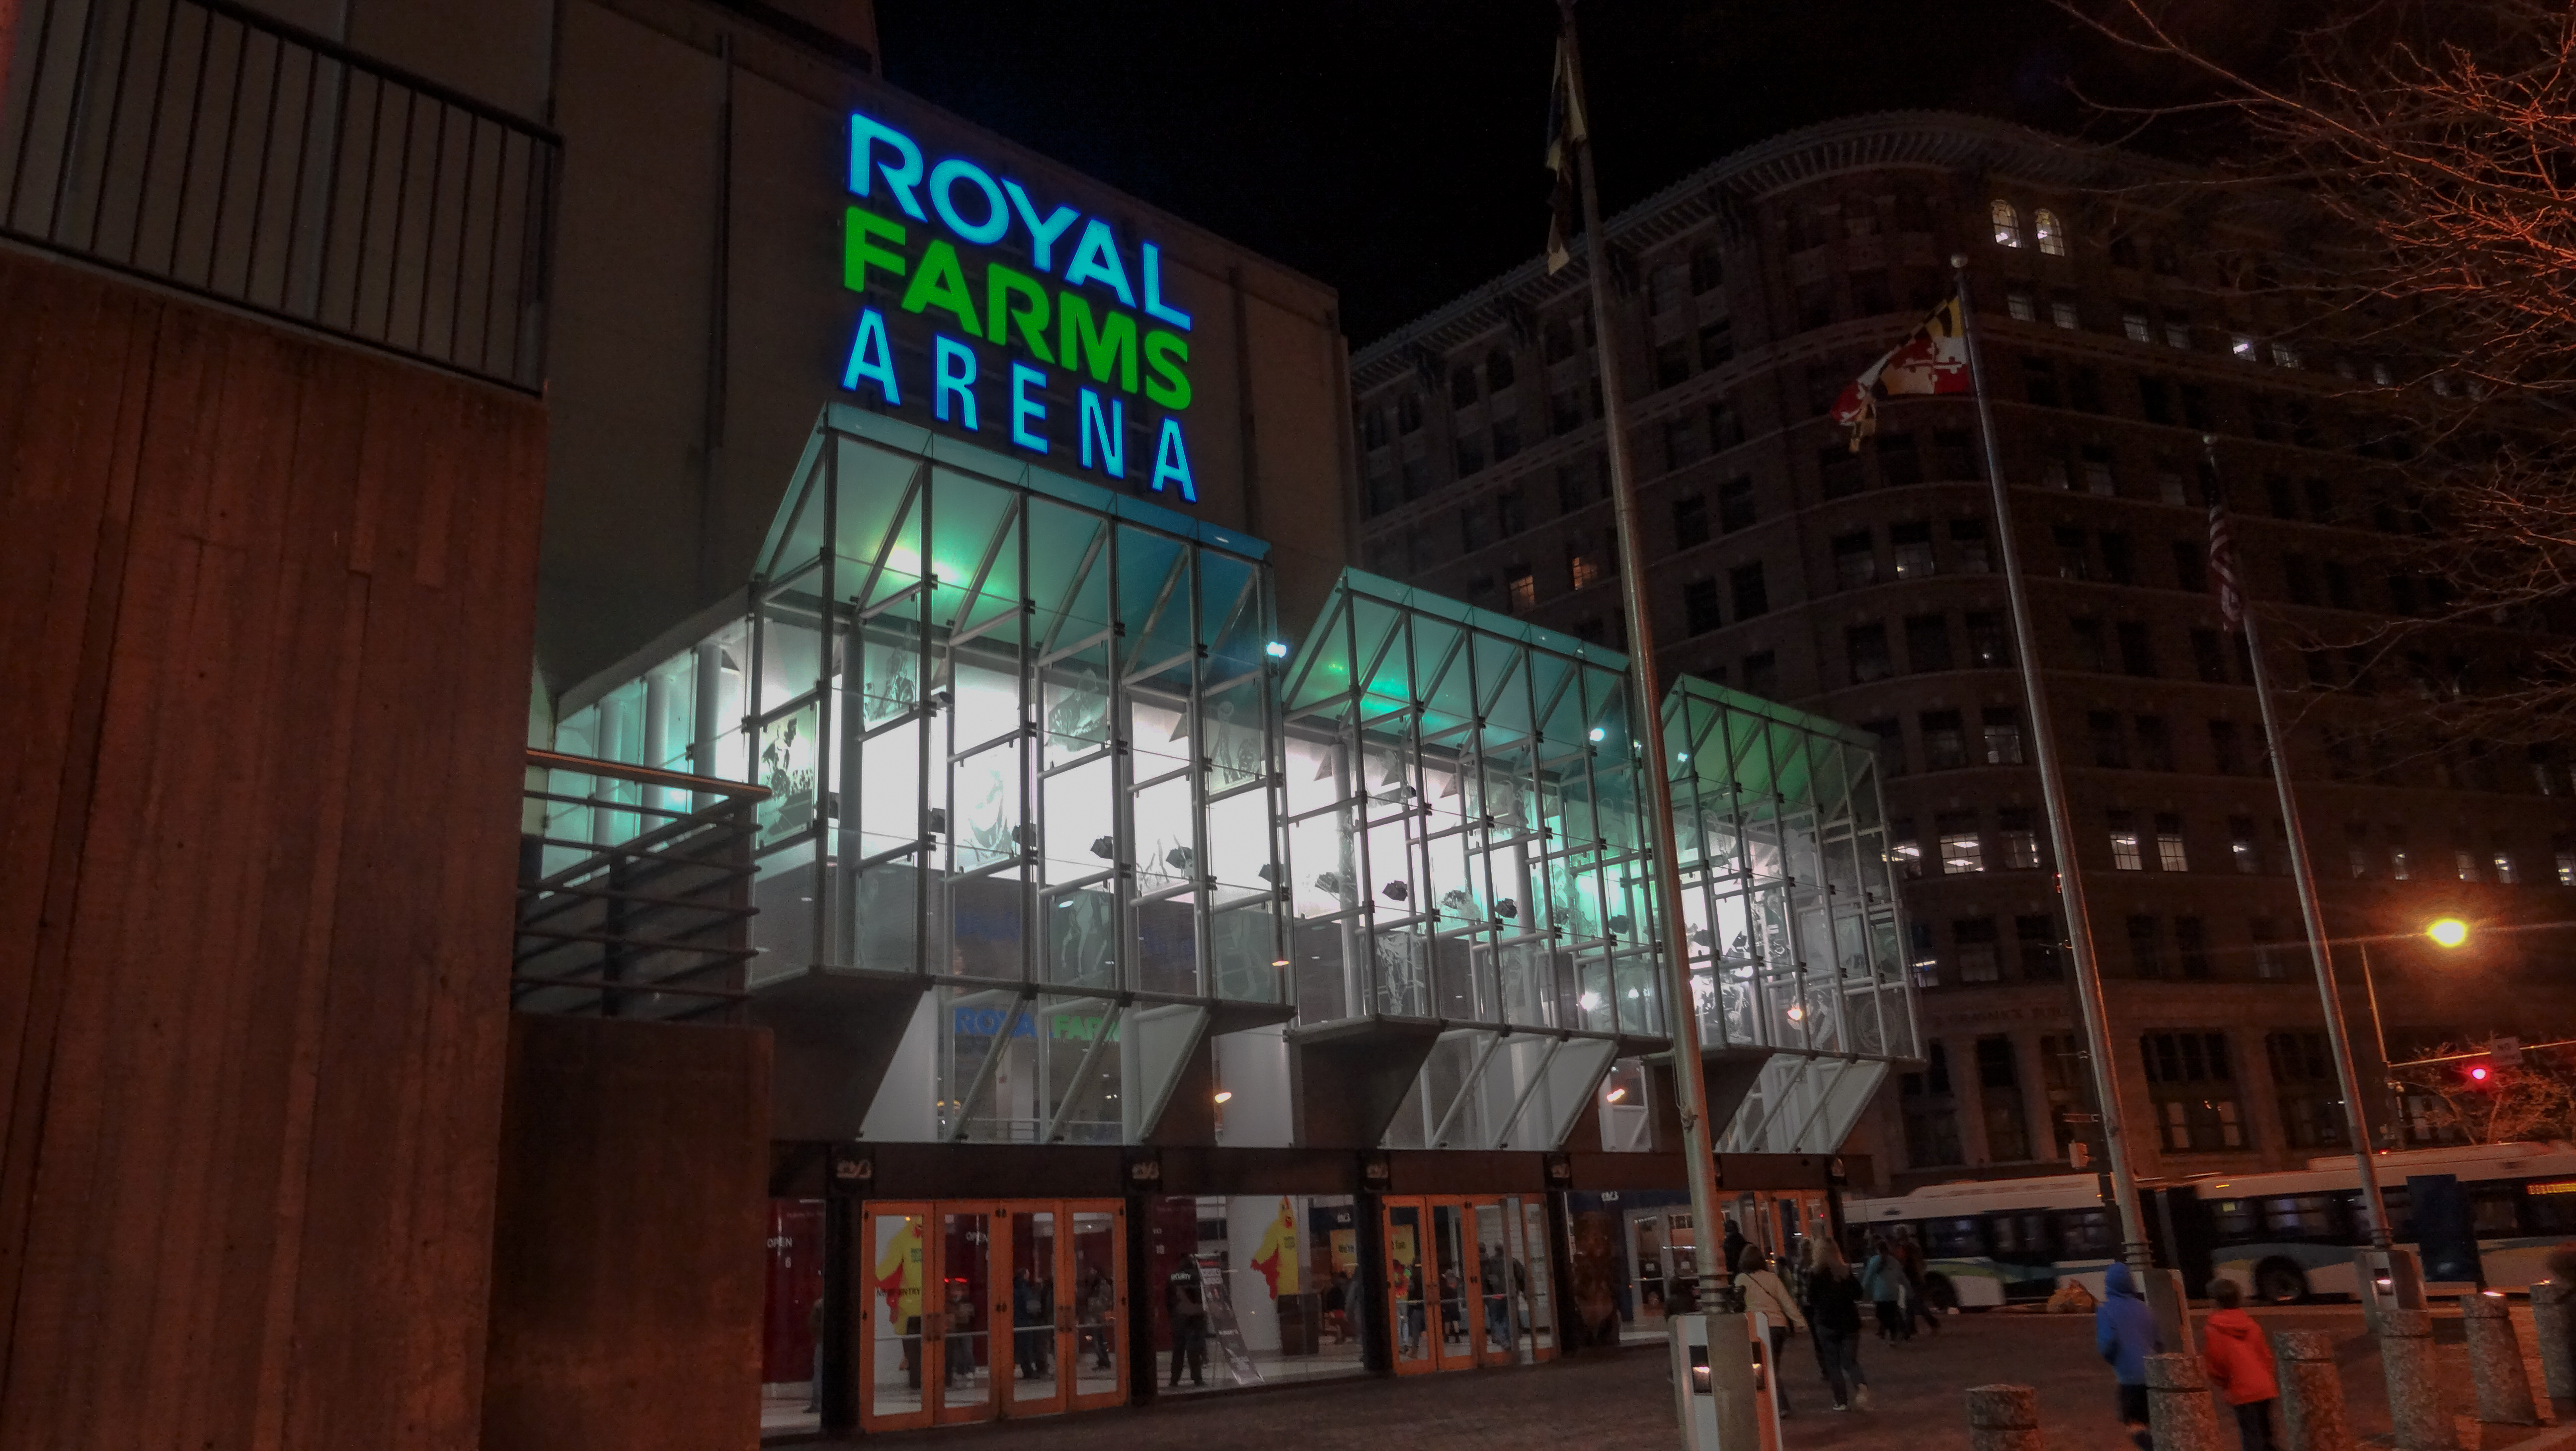 royal farms arena pictures